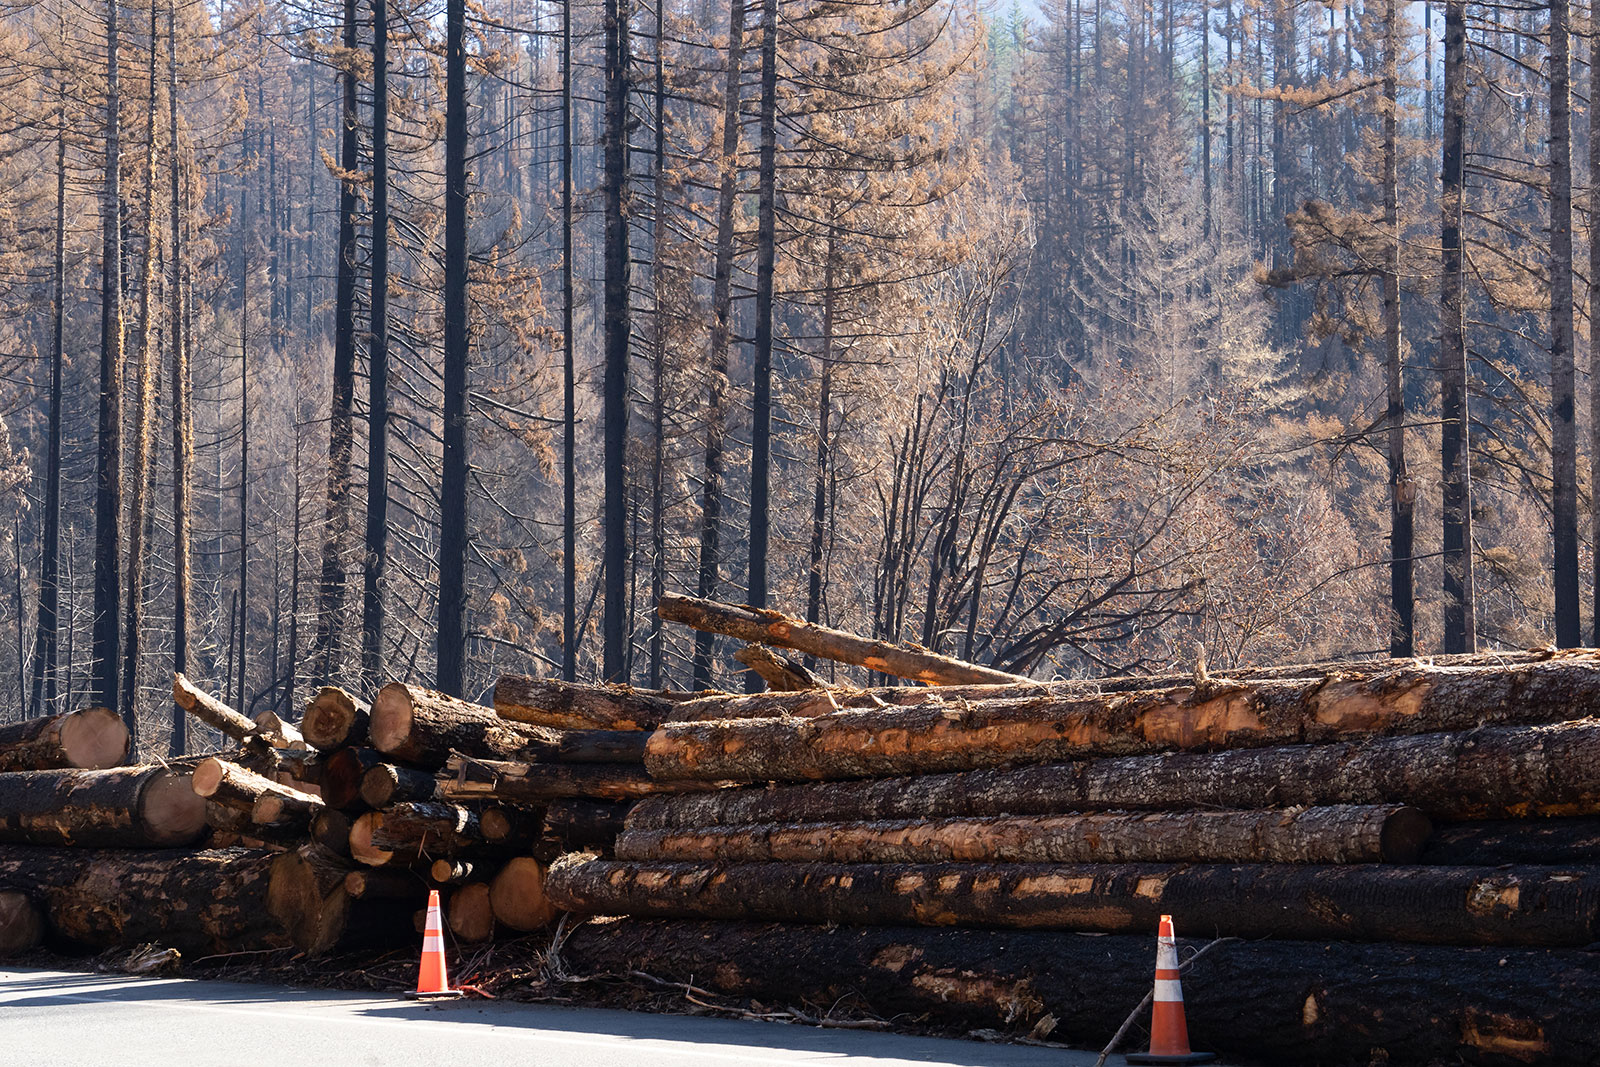 FSEEE Files Lawsuit to Stop Post-fire Logging in Oregon